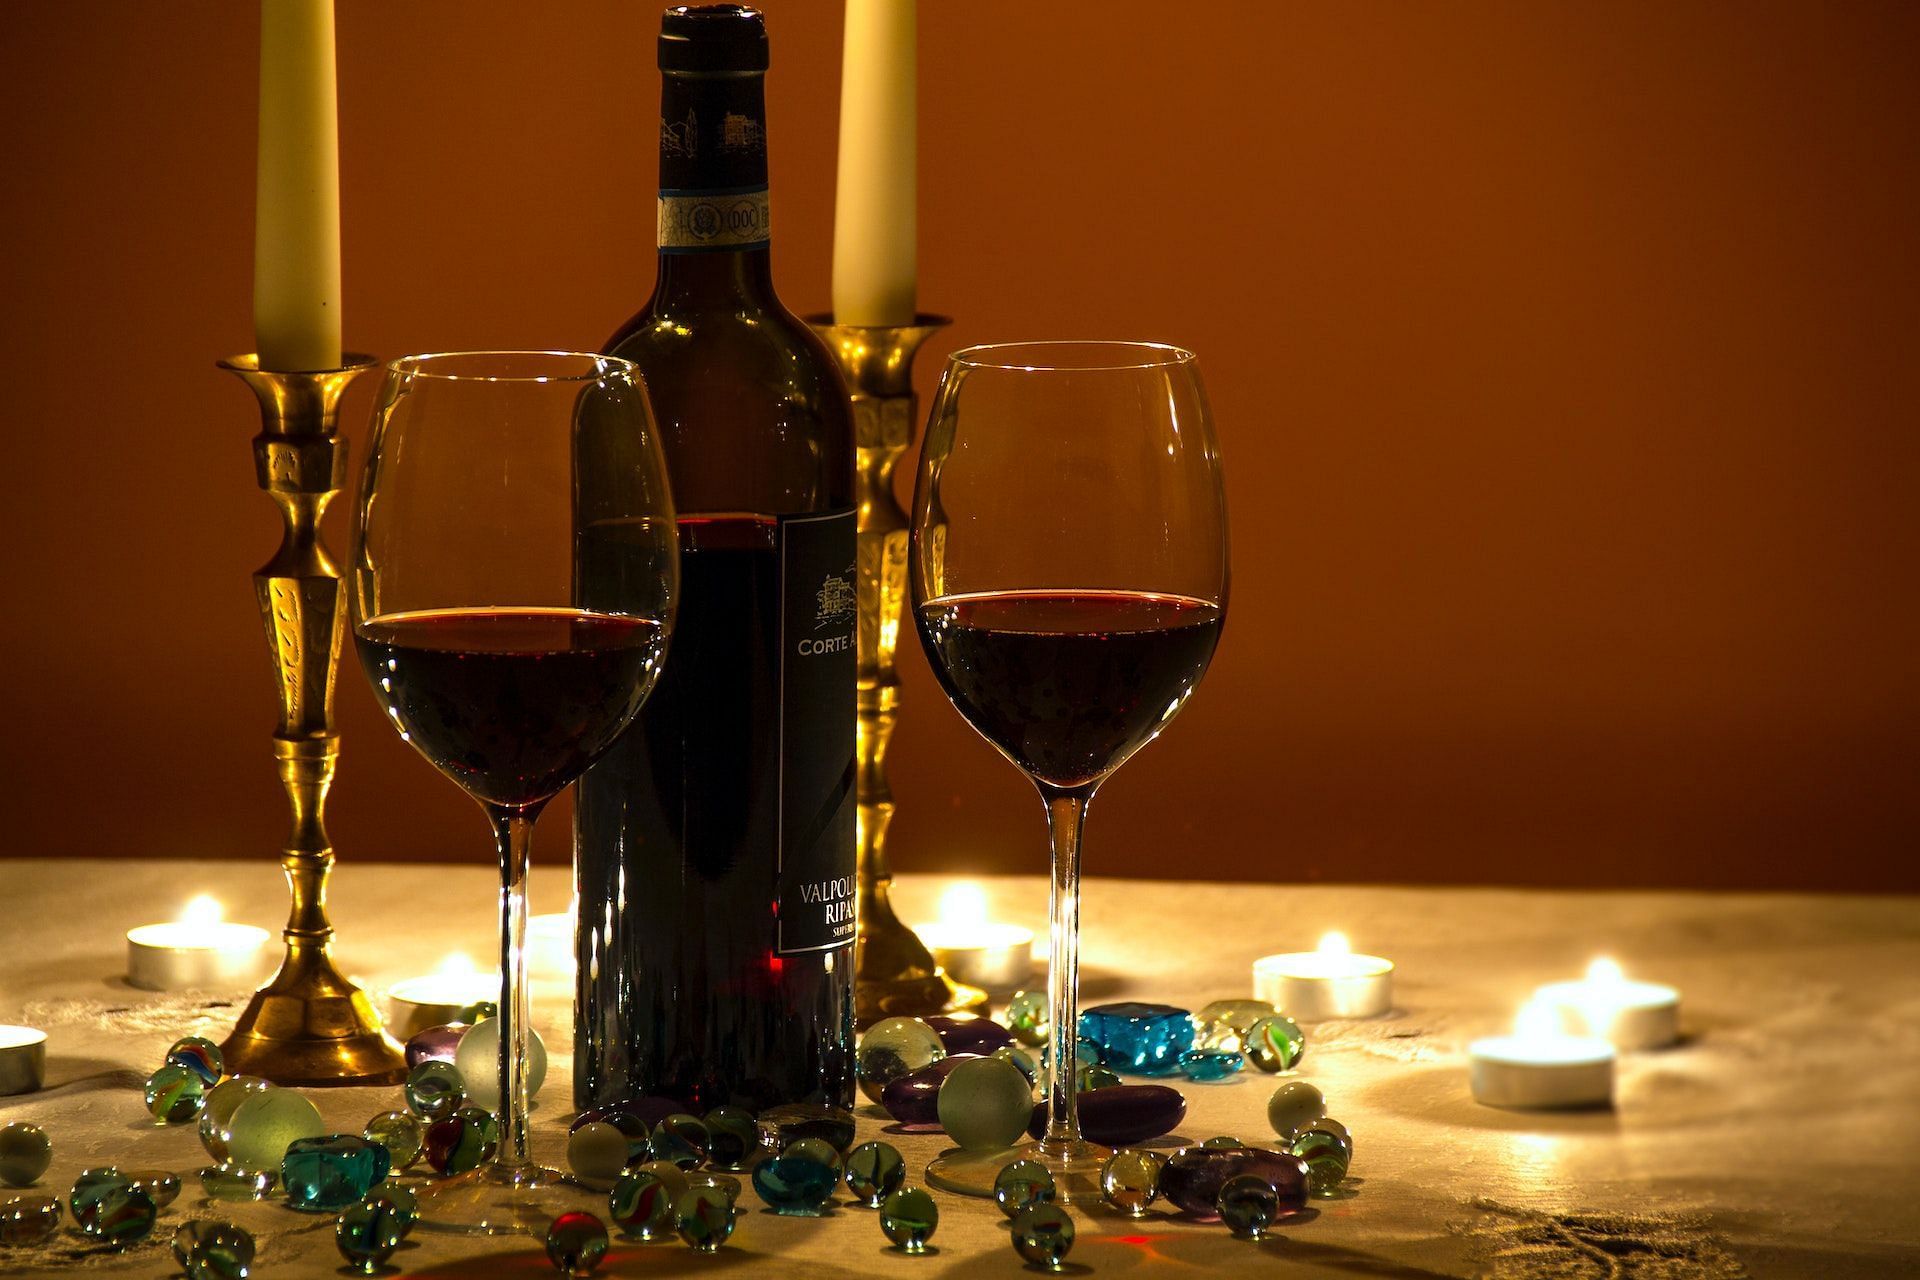 Moderate drinking of wine is also not safe. (Photo via Pexels/Photo by PhotoMIX Company)